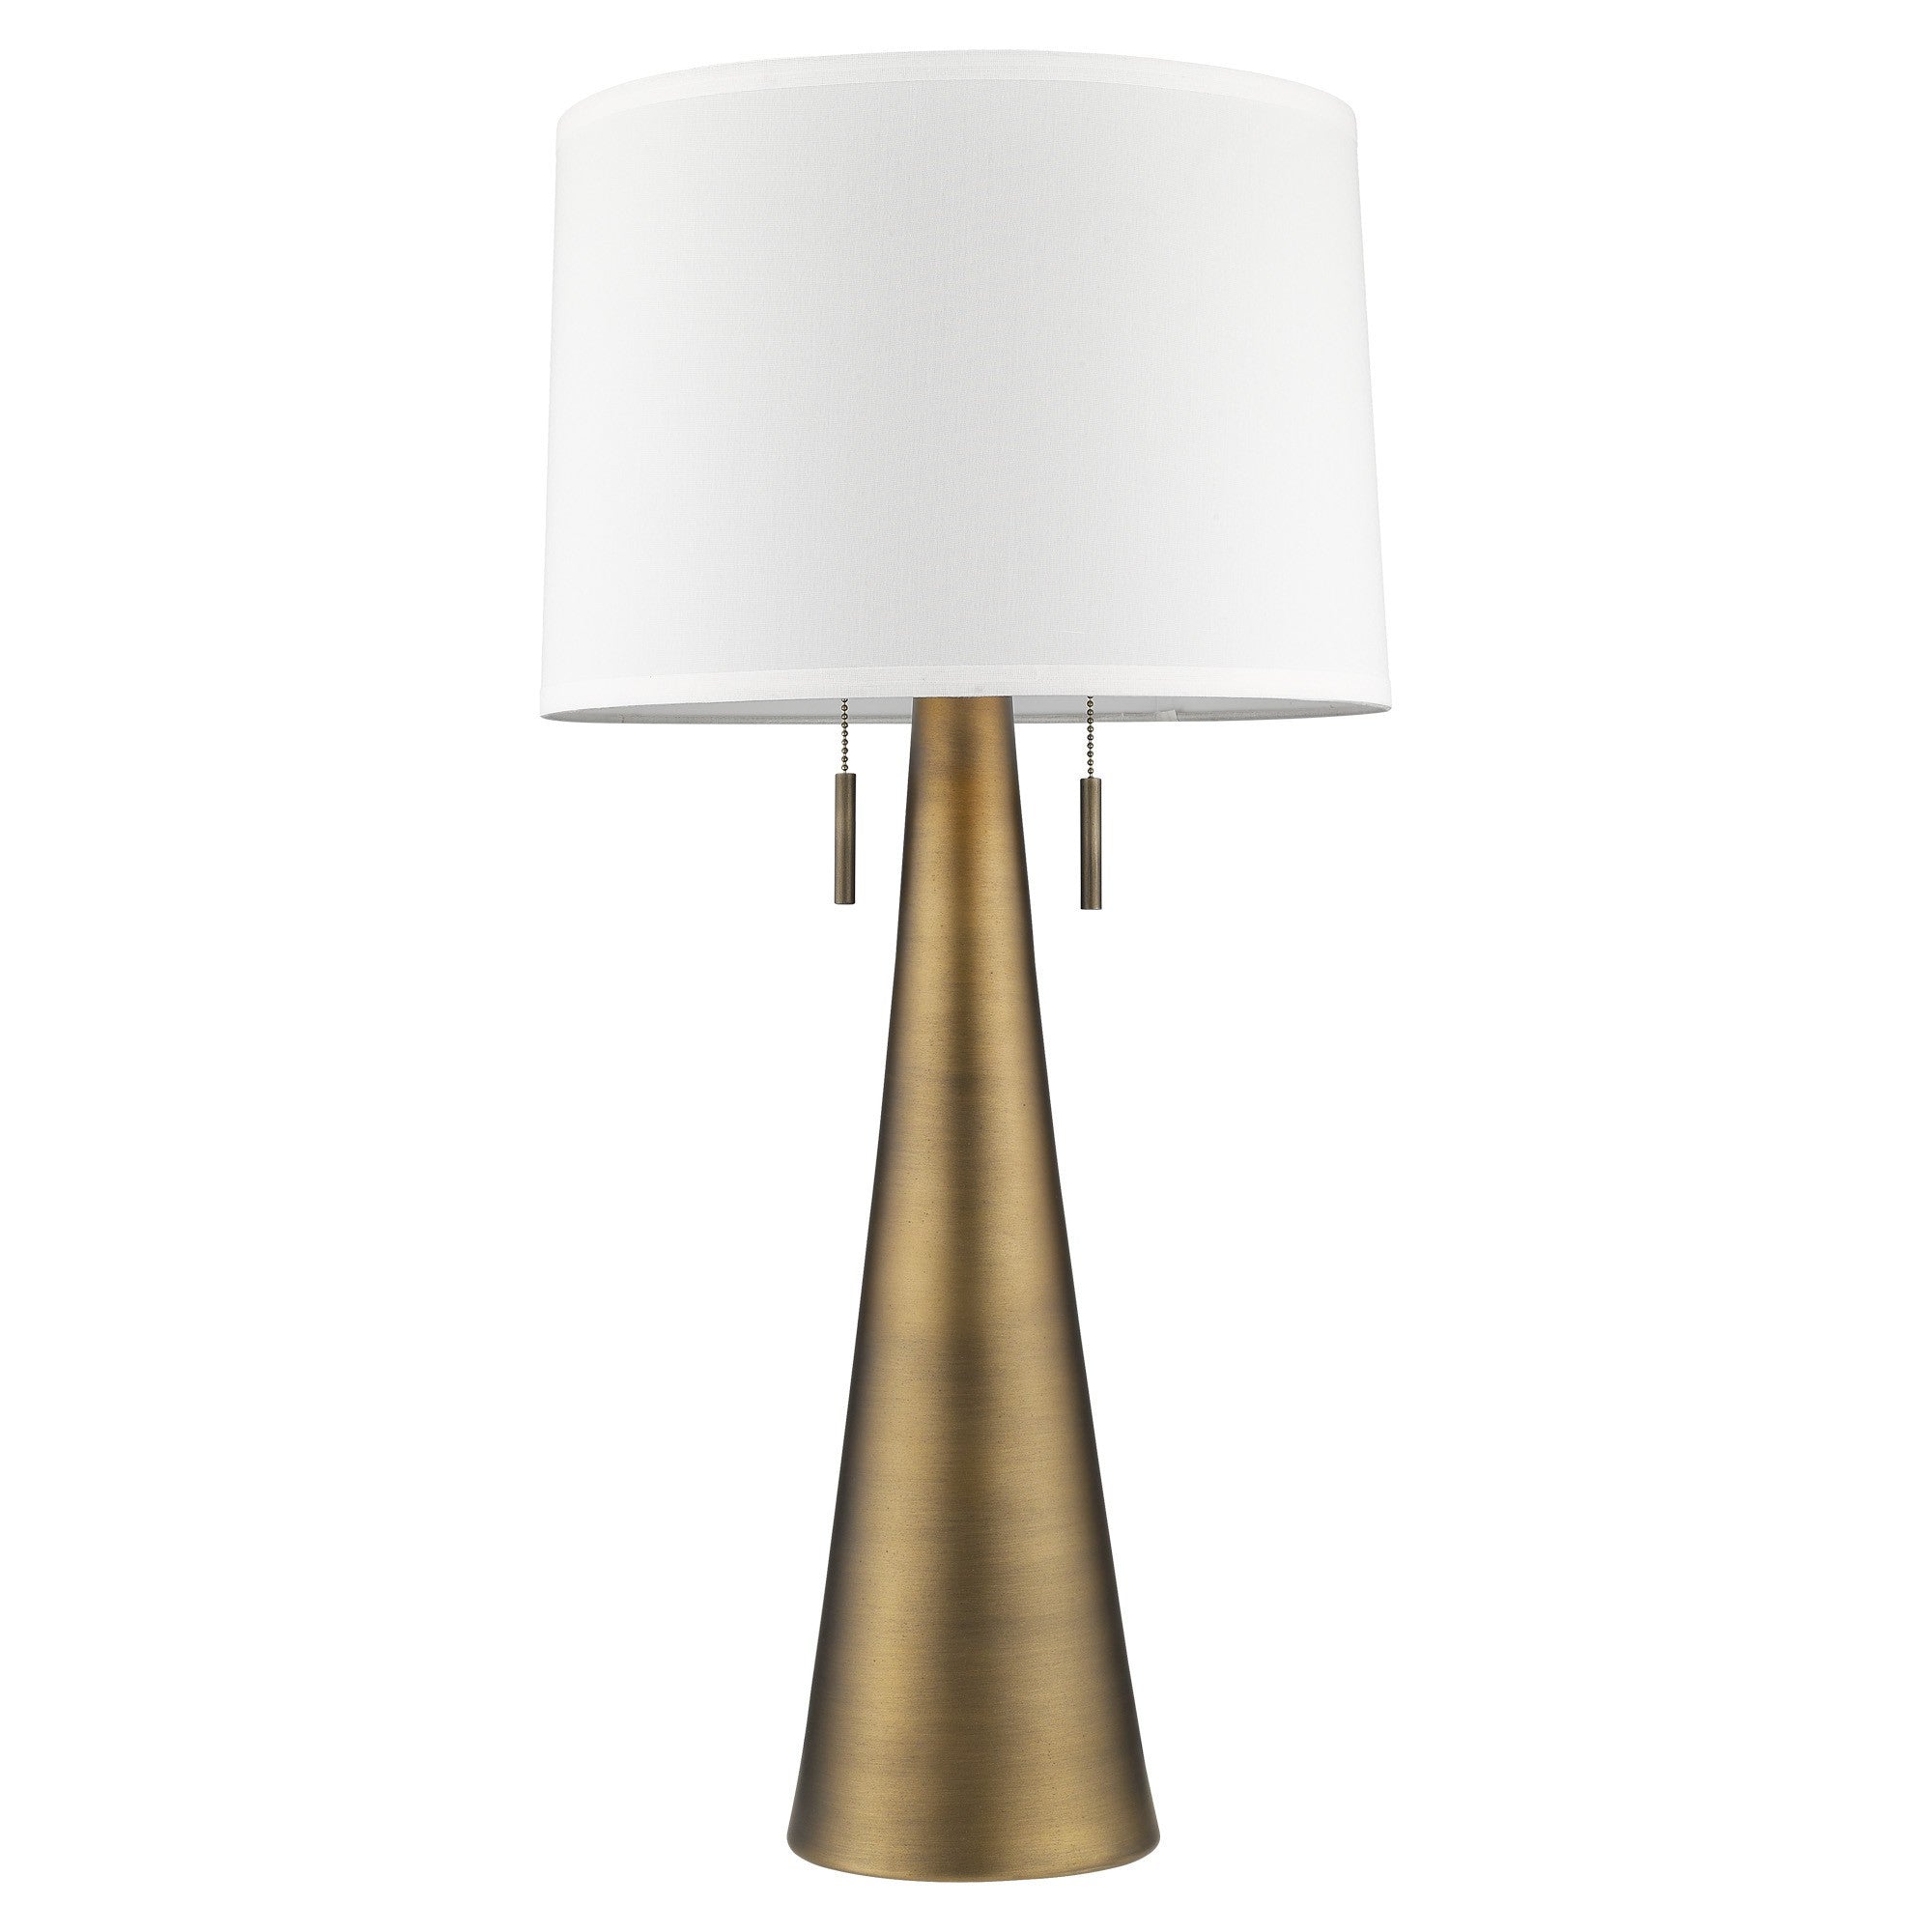 34" Brass Metal Two Light Table Lamp With White Empire Shade